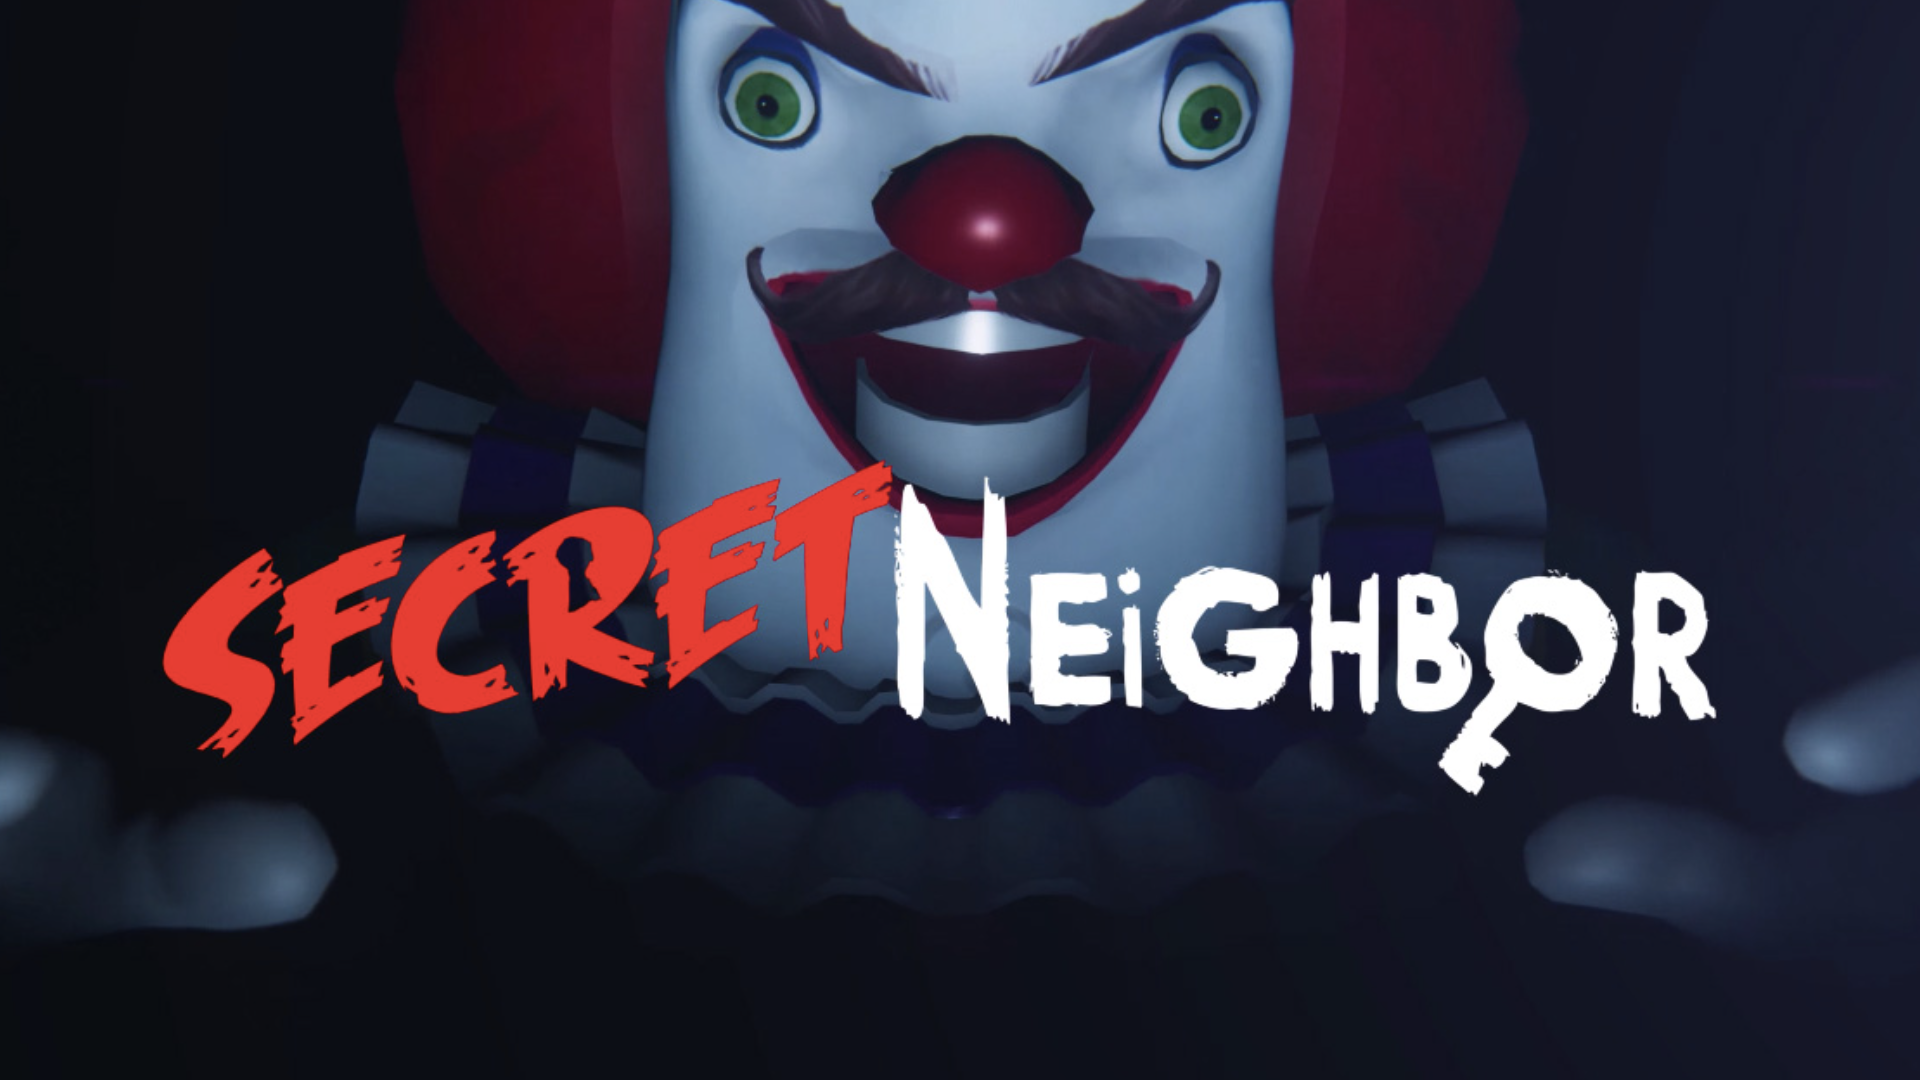 Secret Neighbor is out now on Roblox!